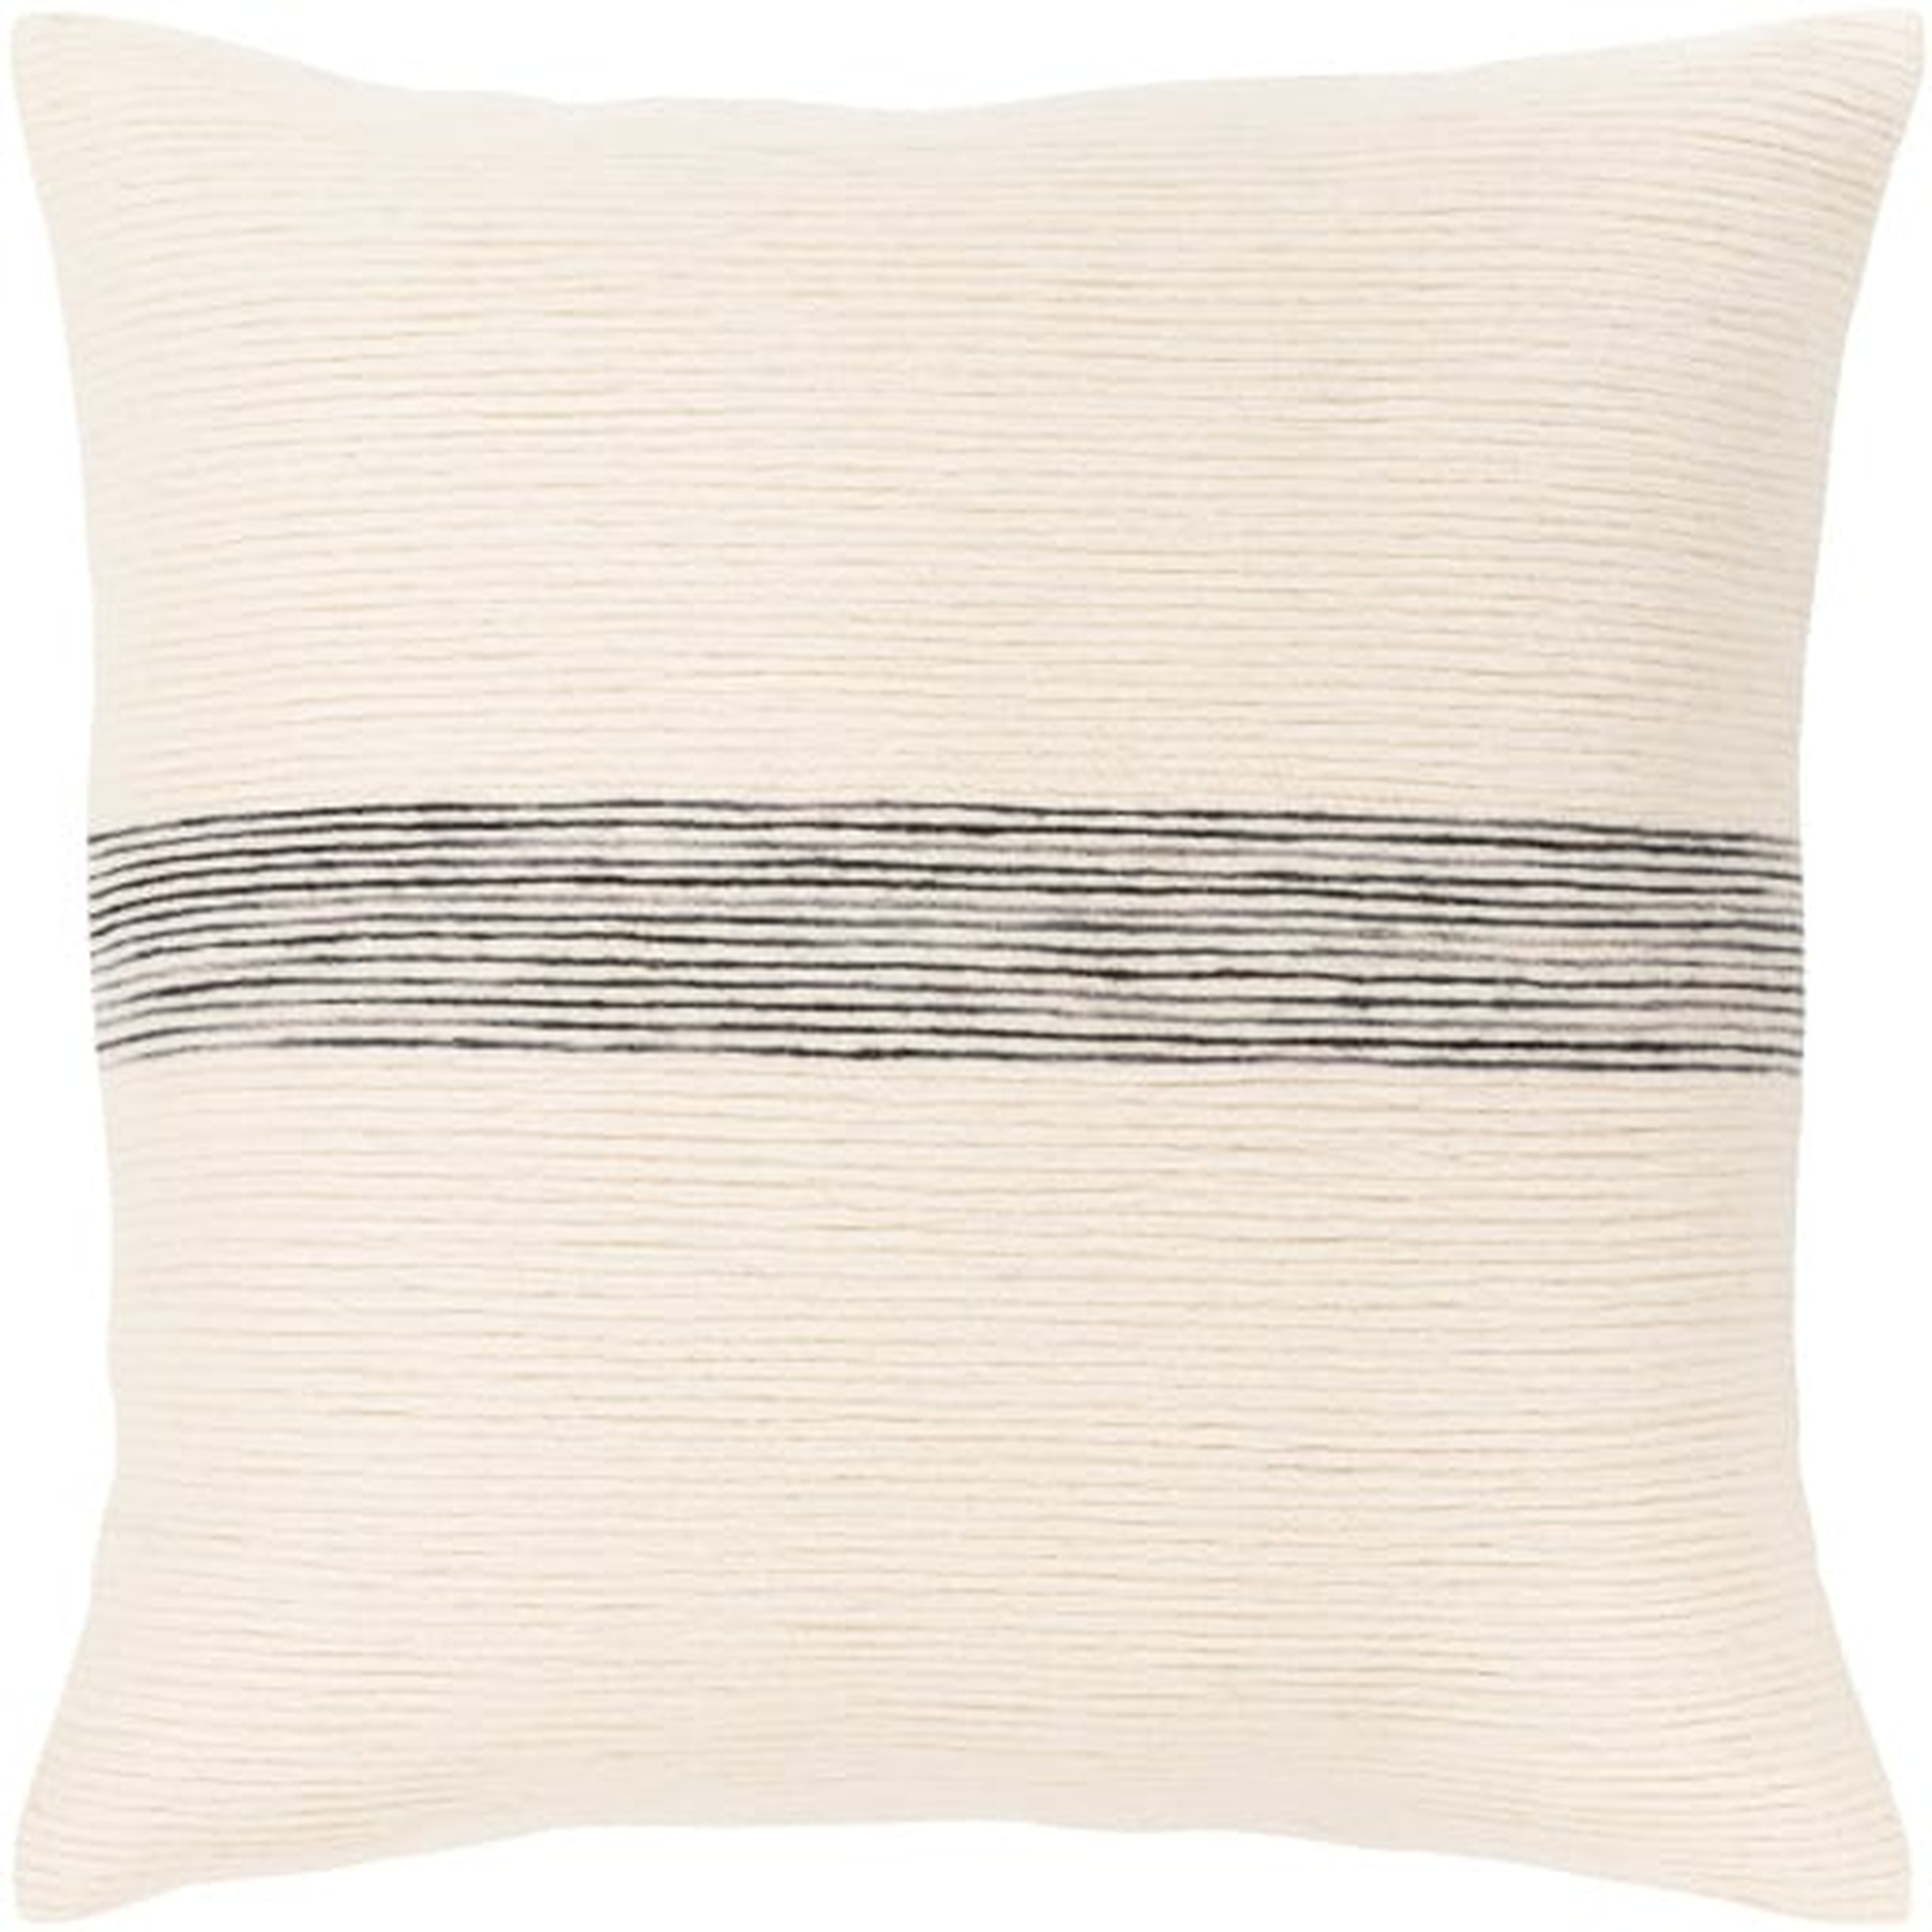 Carine Throw Pillow, 22" x 22", with poly insert - Surya